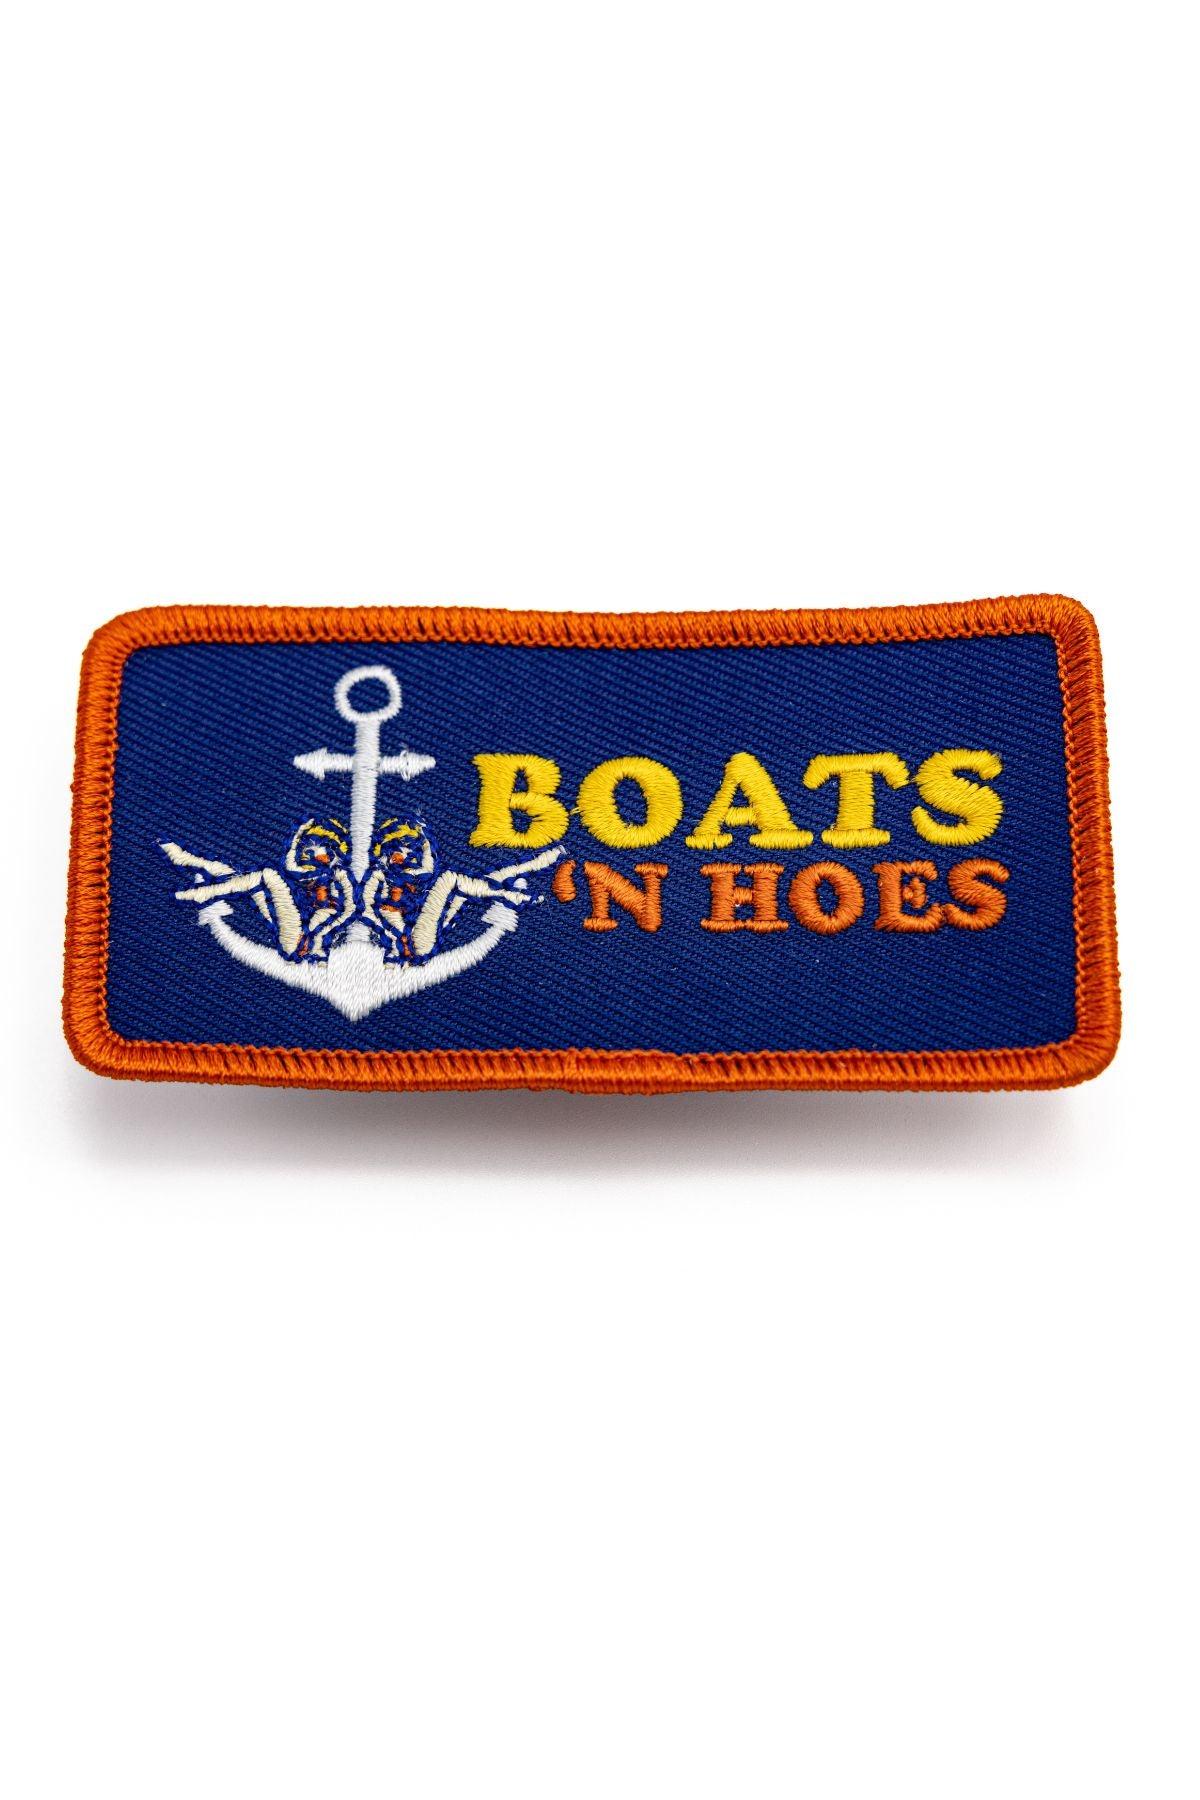 BOATS 'N HOES EMBROIDERED PATCH - Cowboy Snapback